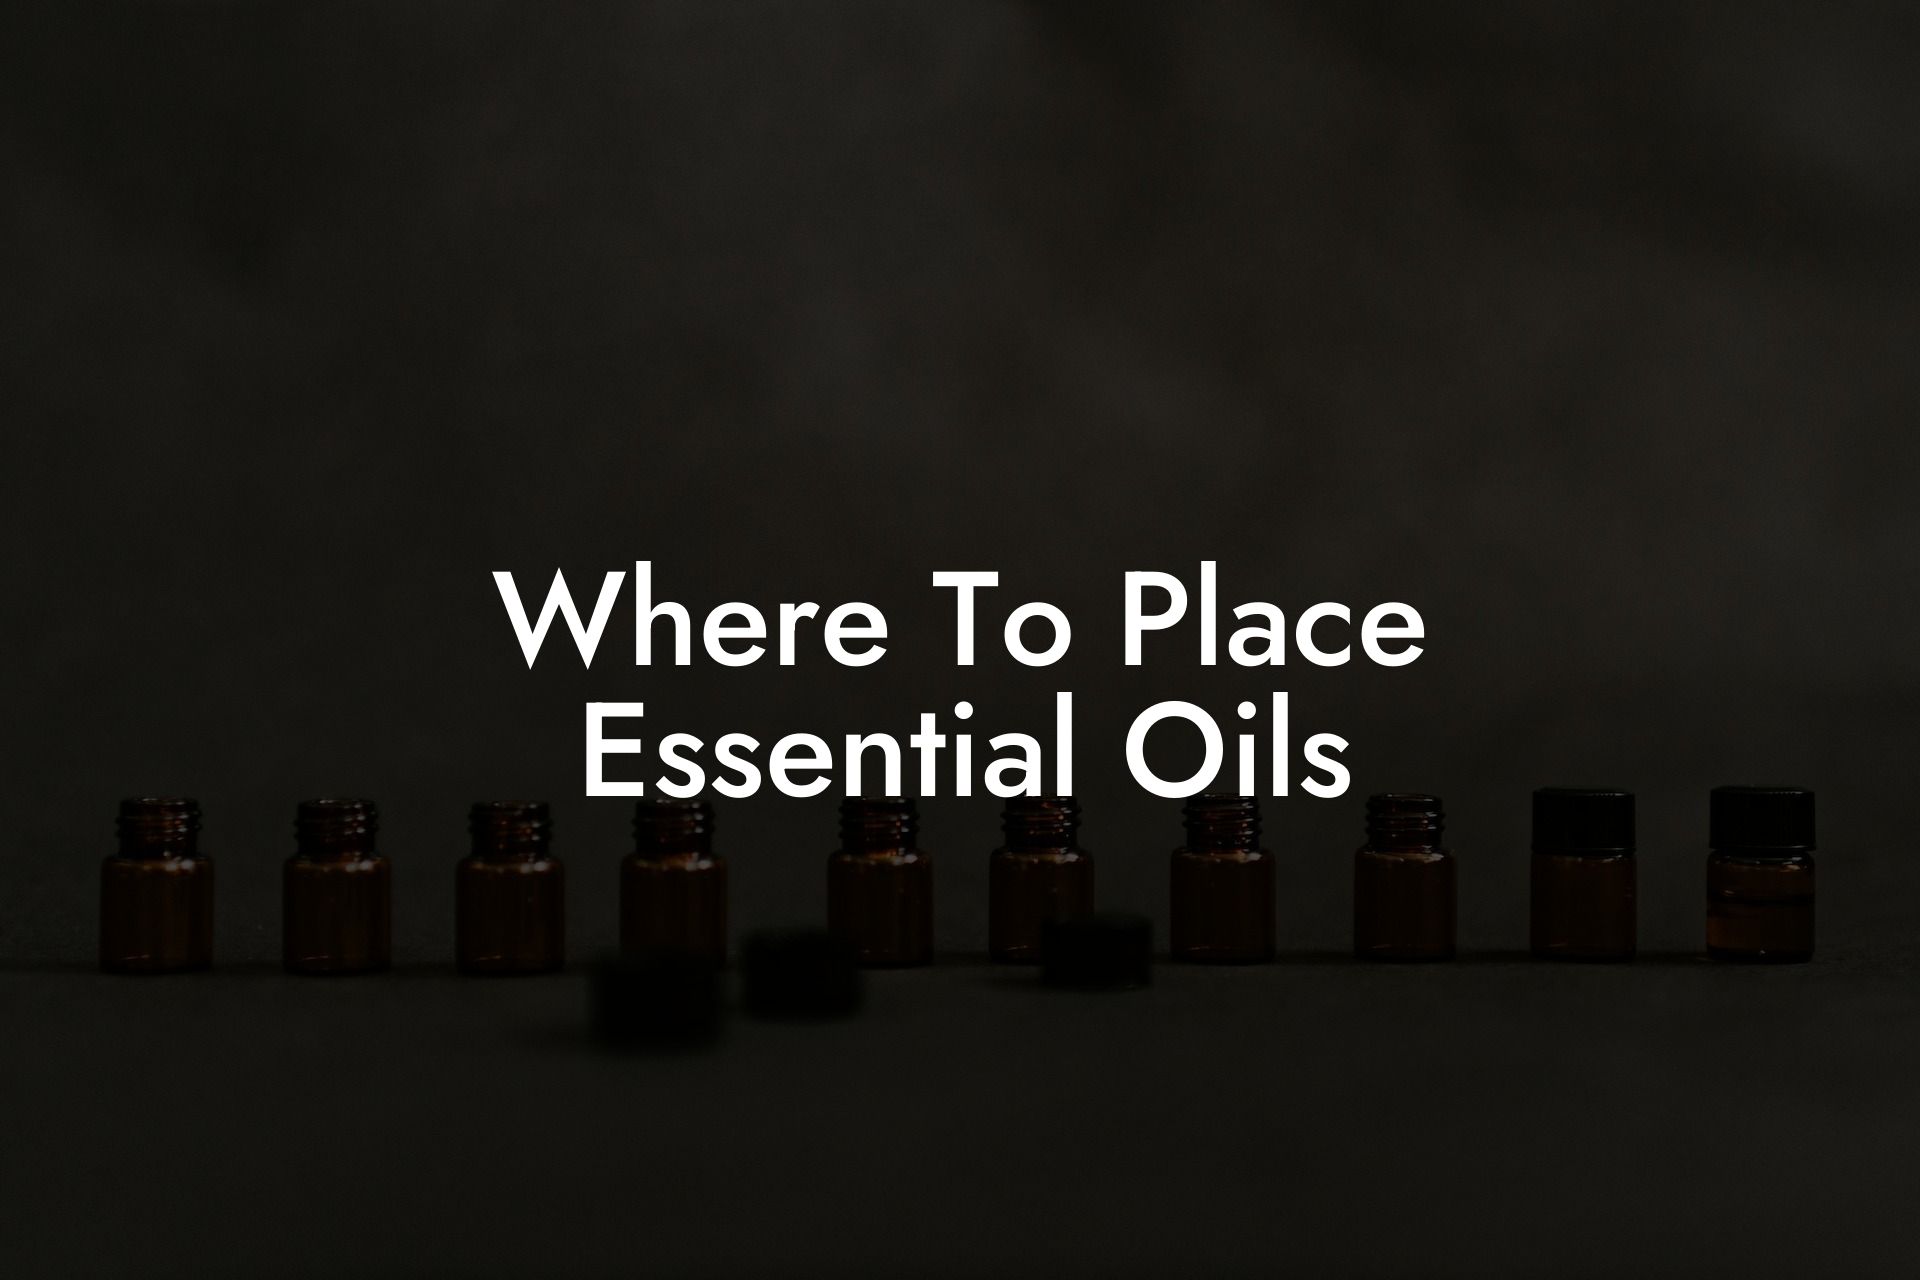 Where To Place Essential Oils